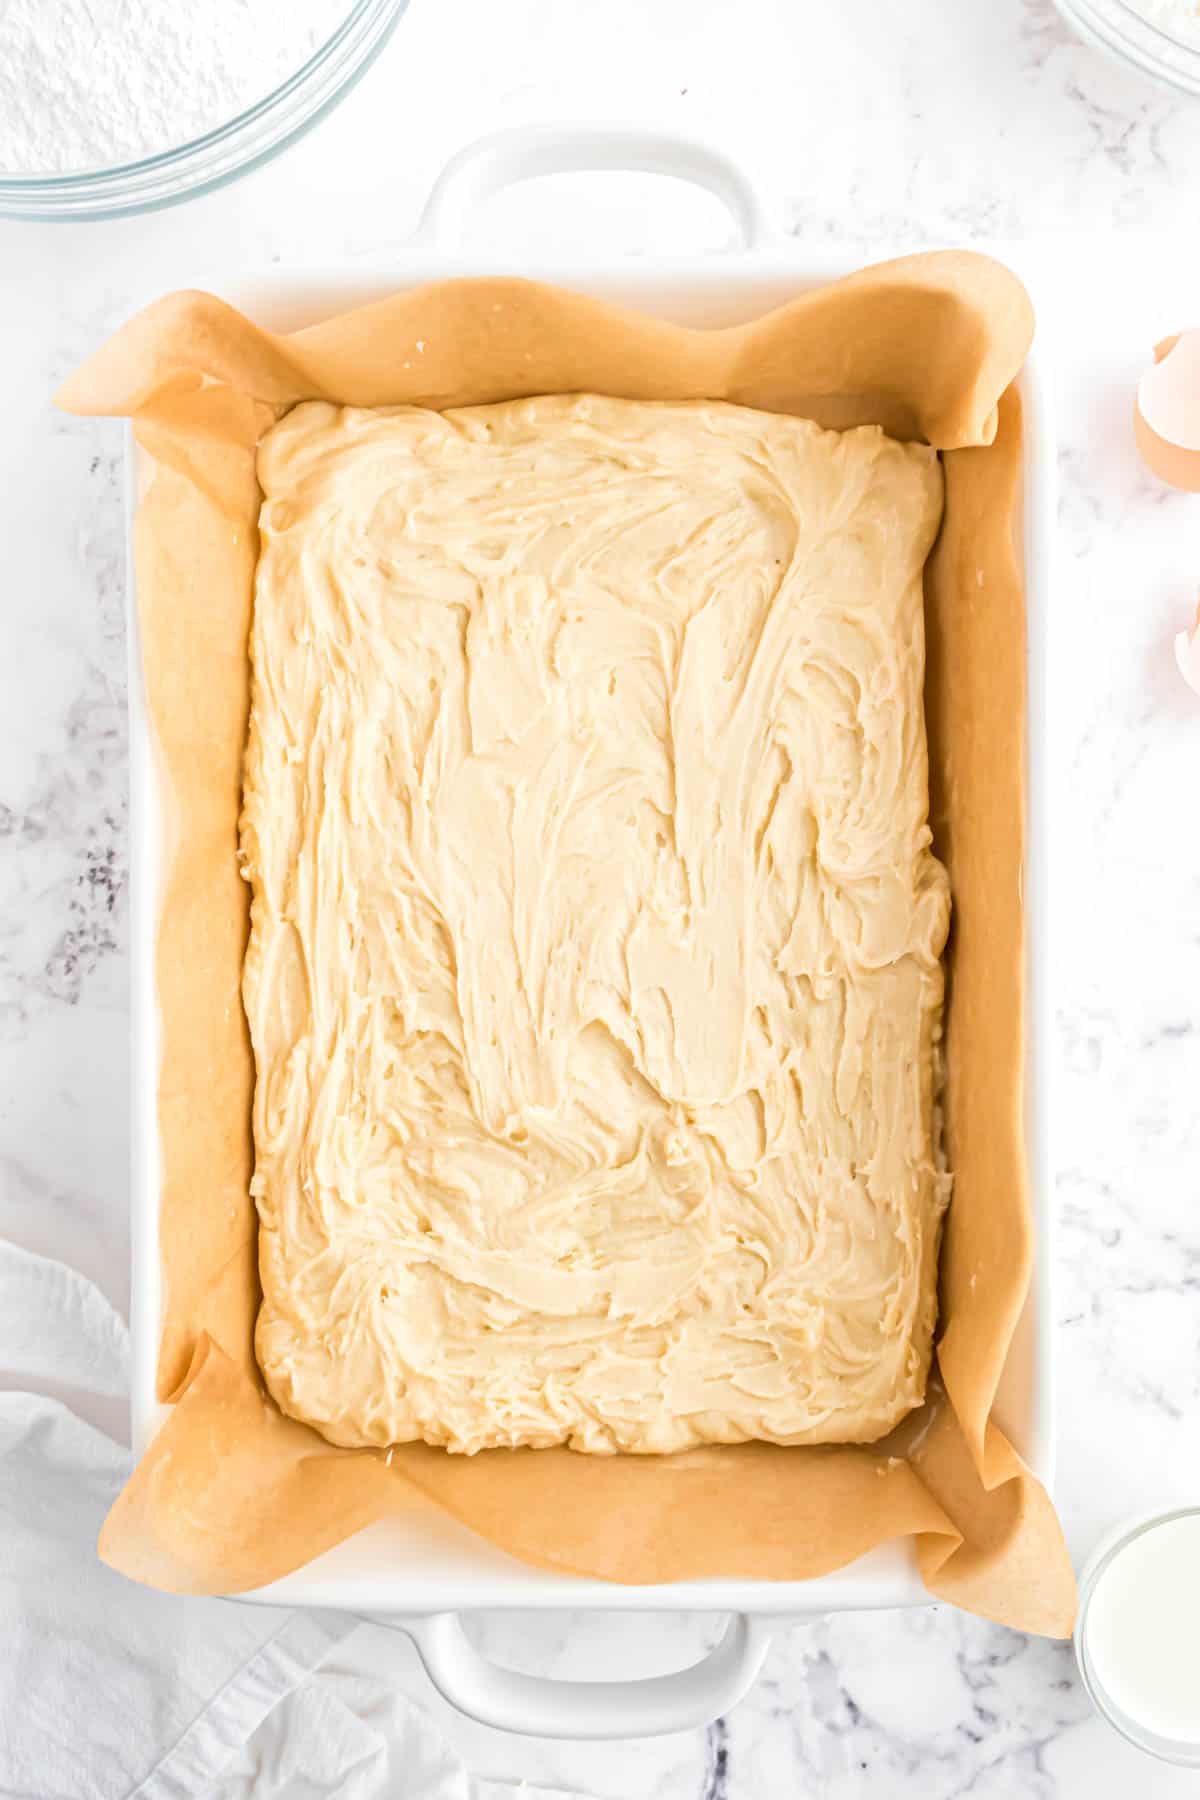 Sugar cookie dough spread into a white baking dish lined with a parchment paper sling.